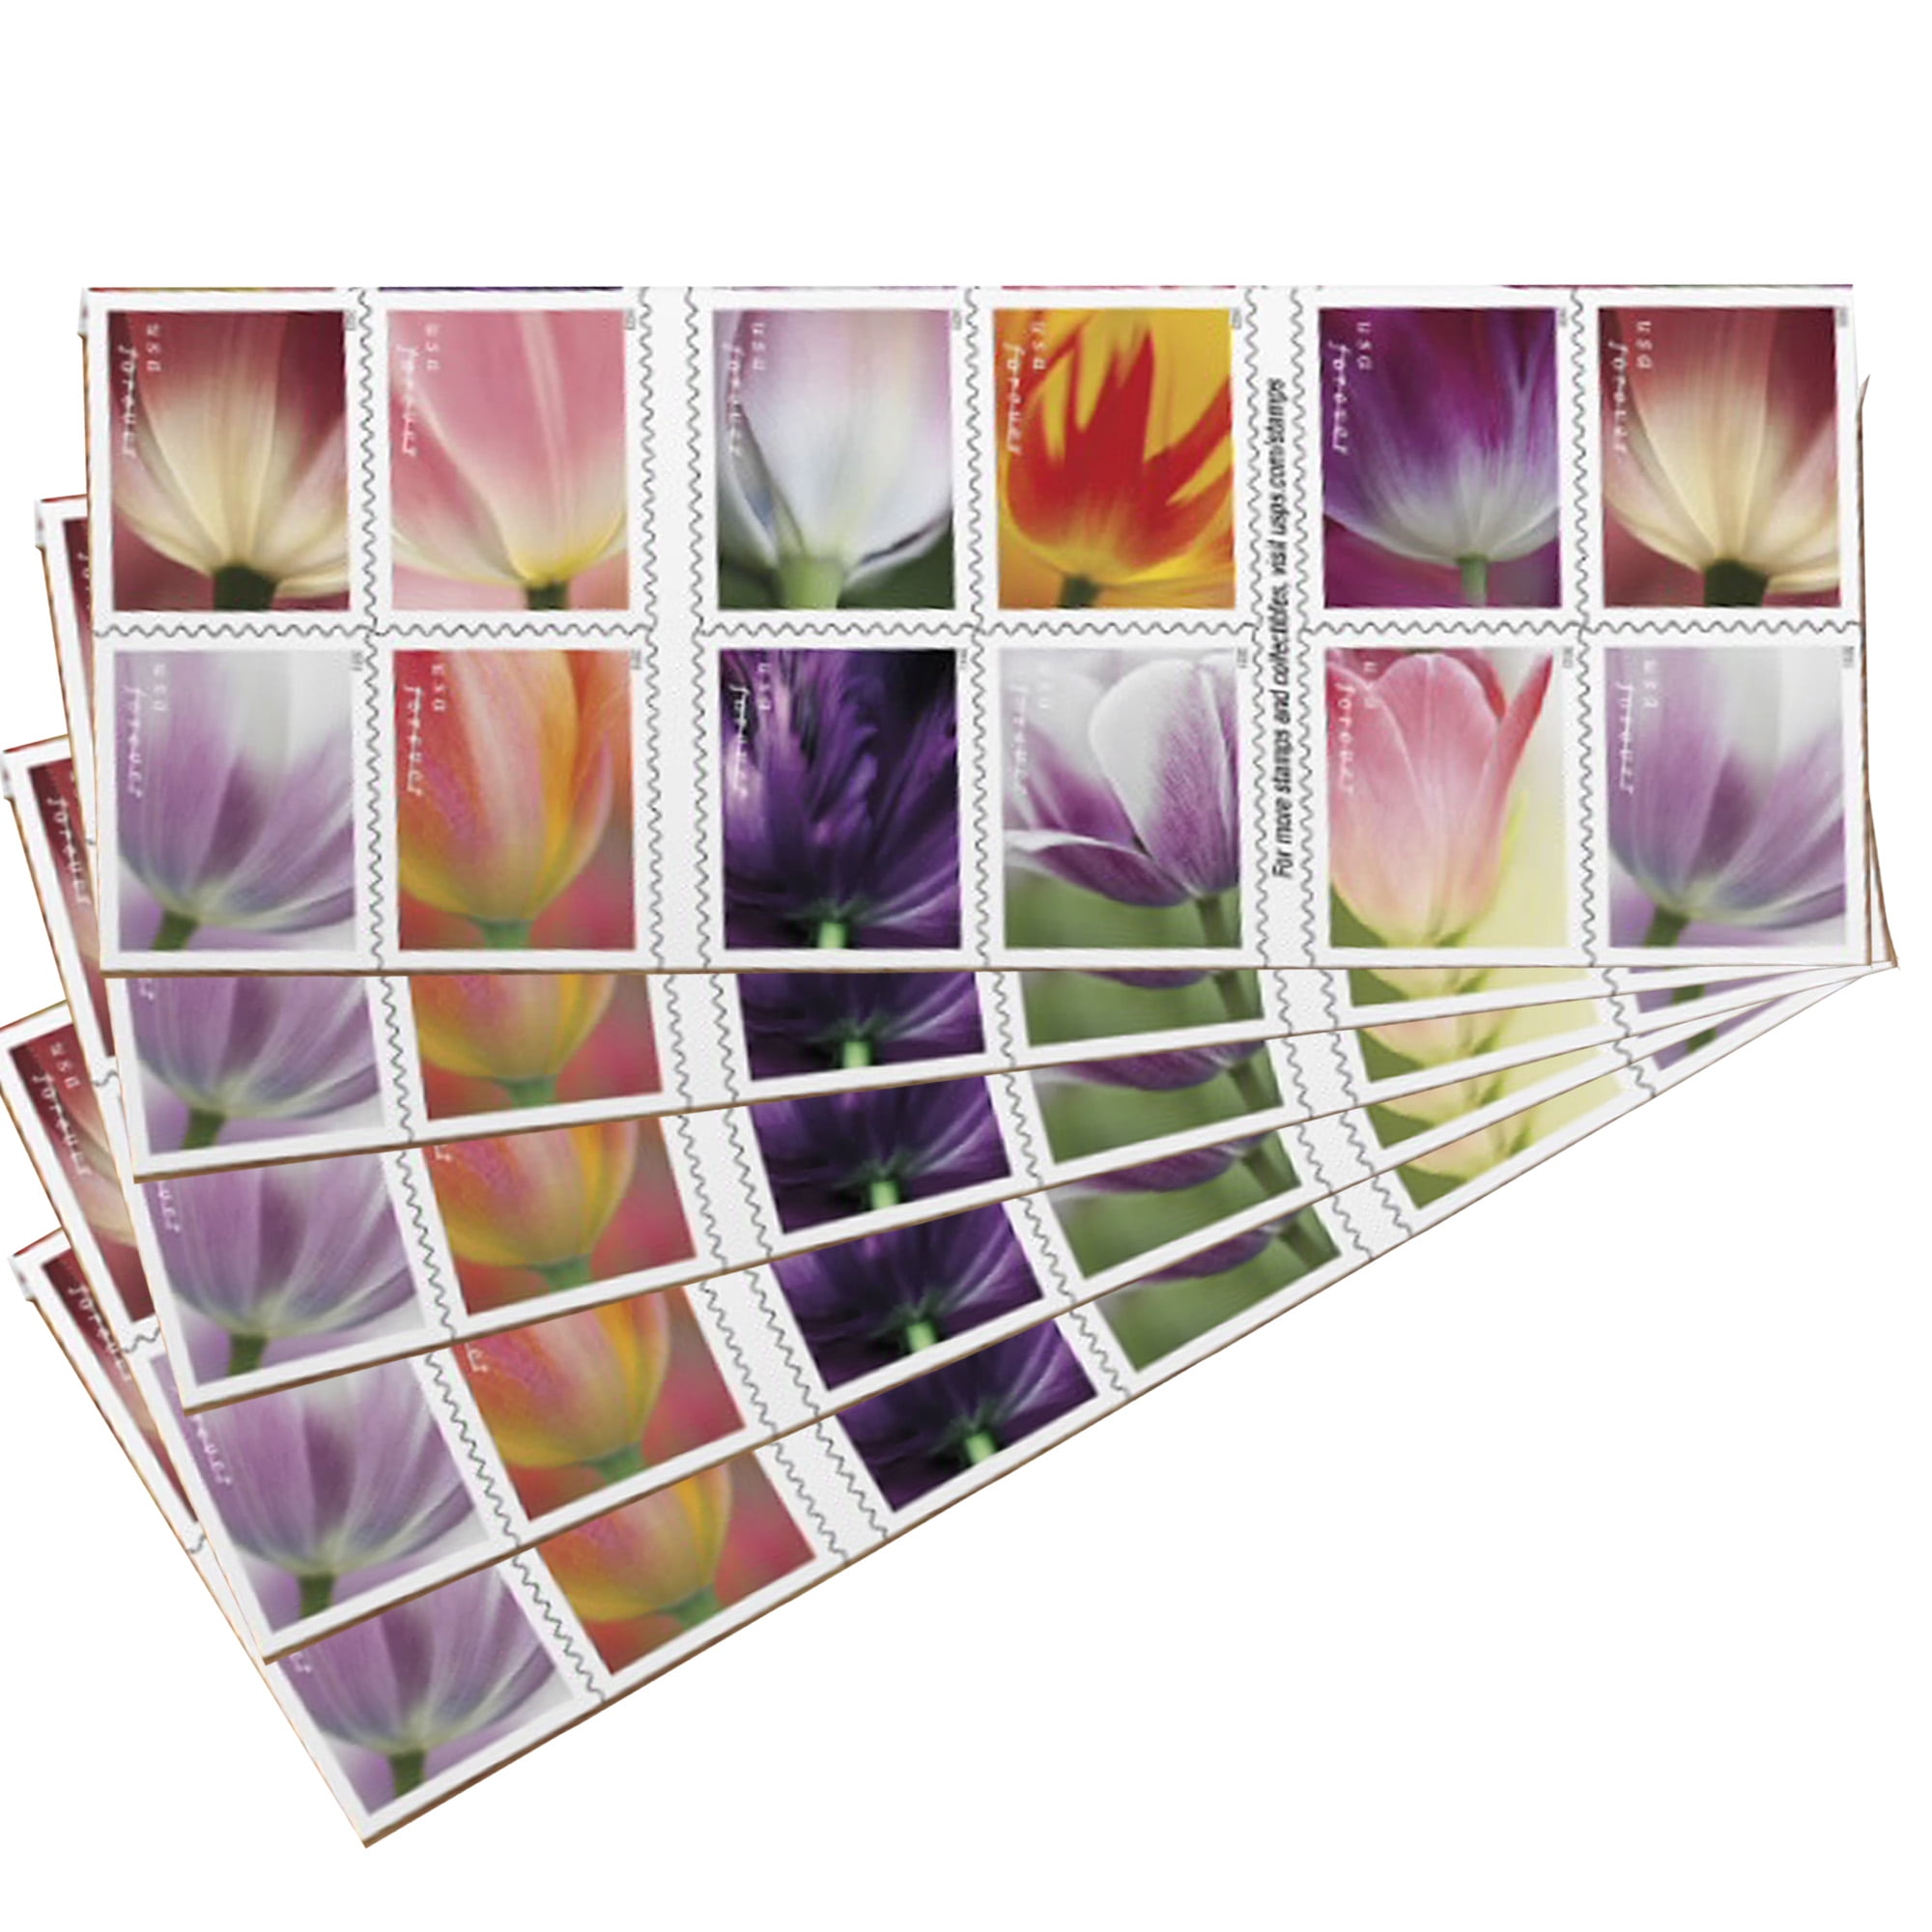 2022 Tulips Forever First Class Postage Stamps | Flowers, Garden, Love,  Wedding Theme | (2 Sheets, 40 Stamps)